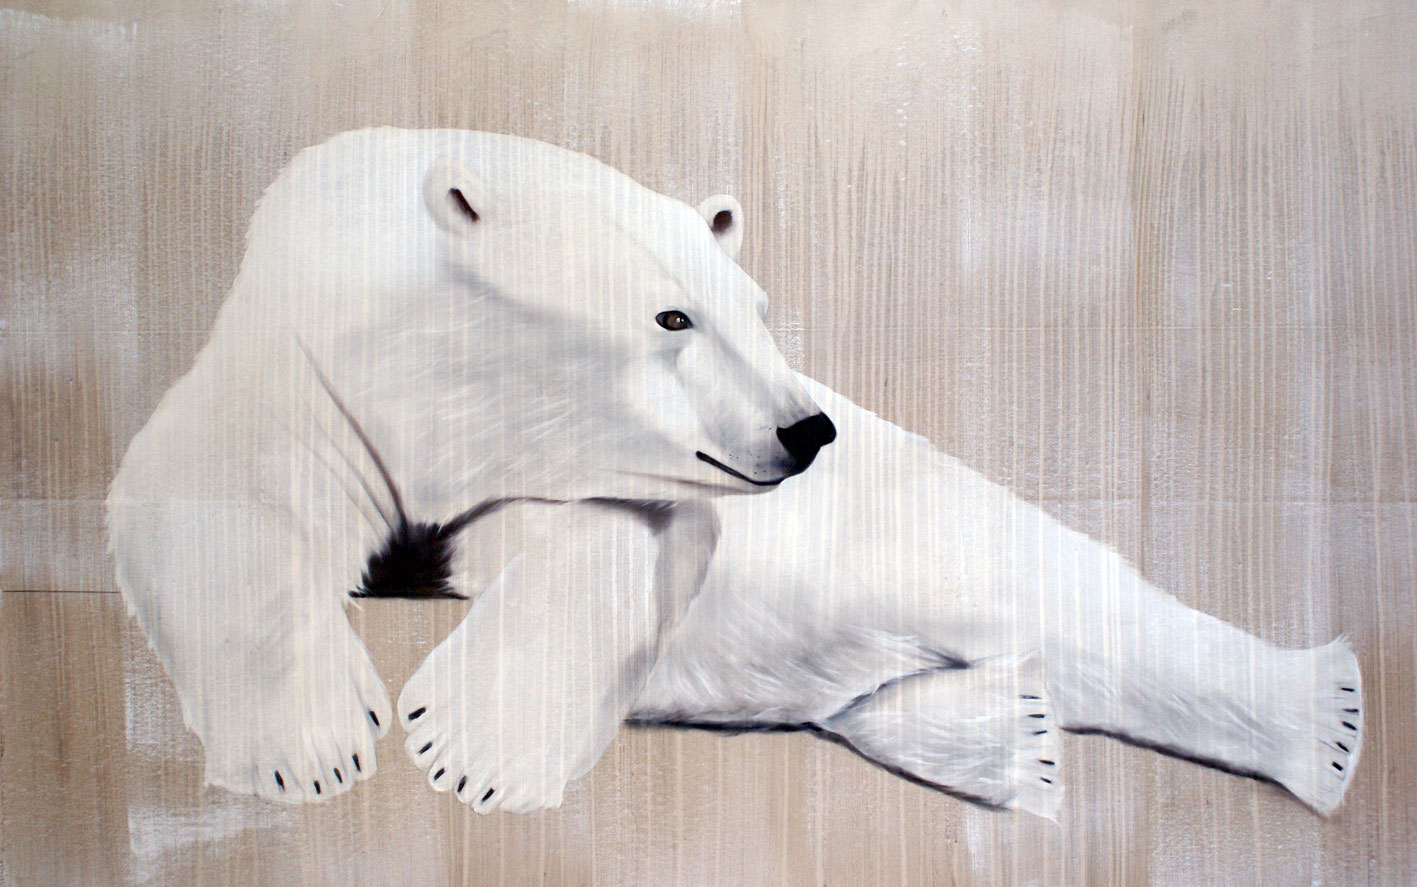 RELAXING POLAR BEAR 1 Polar-bear Thierry Bisch Contemporary painter animals painting art decoration nature biodiversity conservation